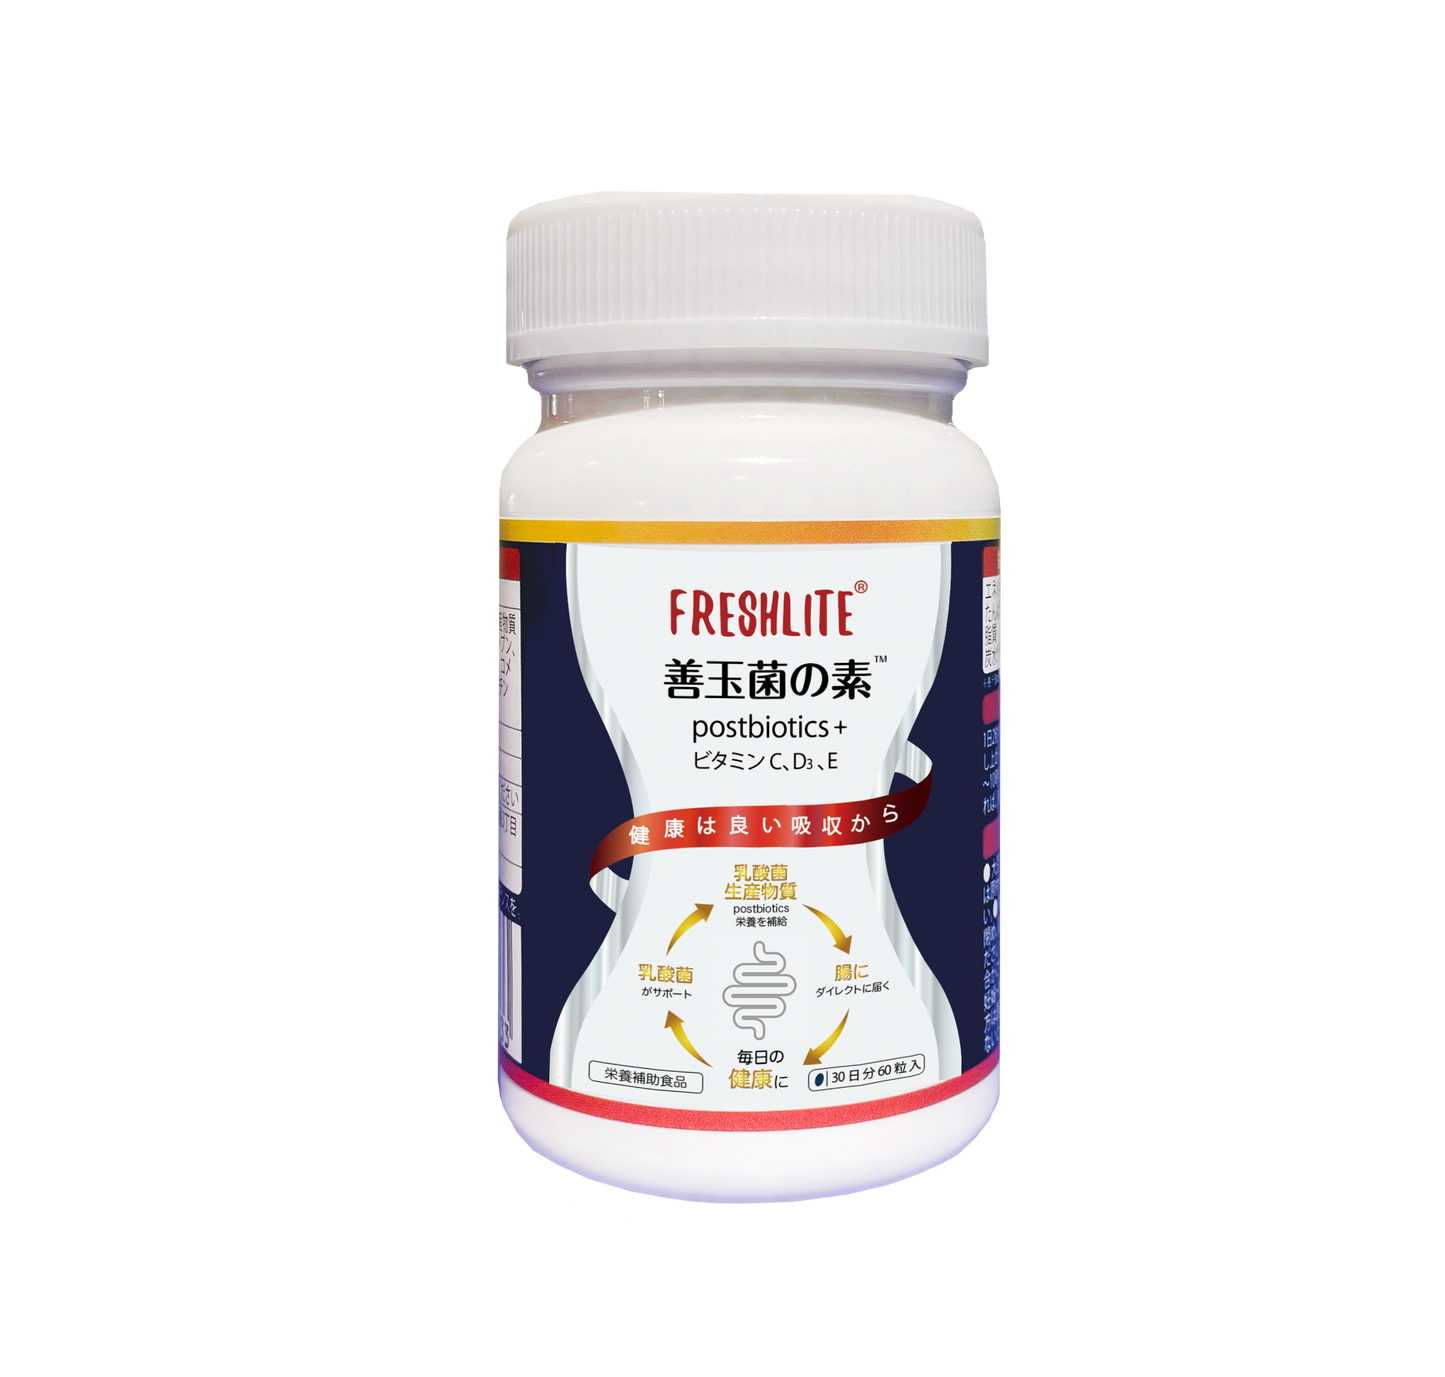 Postbiotics+Vitamins C,D3,E; help with absorption of nutrients, bowel bloating, constipation, chronic diarrhea, gut health, good bacteria growth; 60 capsules for 30 days; take 2 capsules after dinner per day, 3 capsules are advised if needed